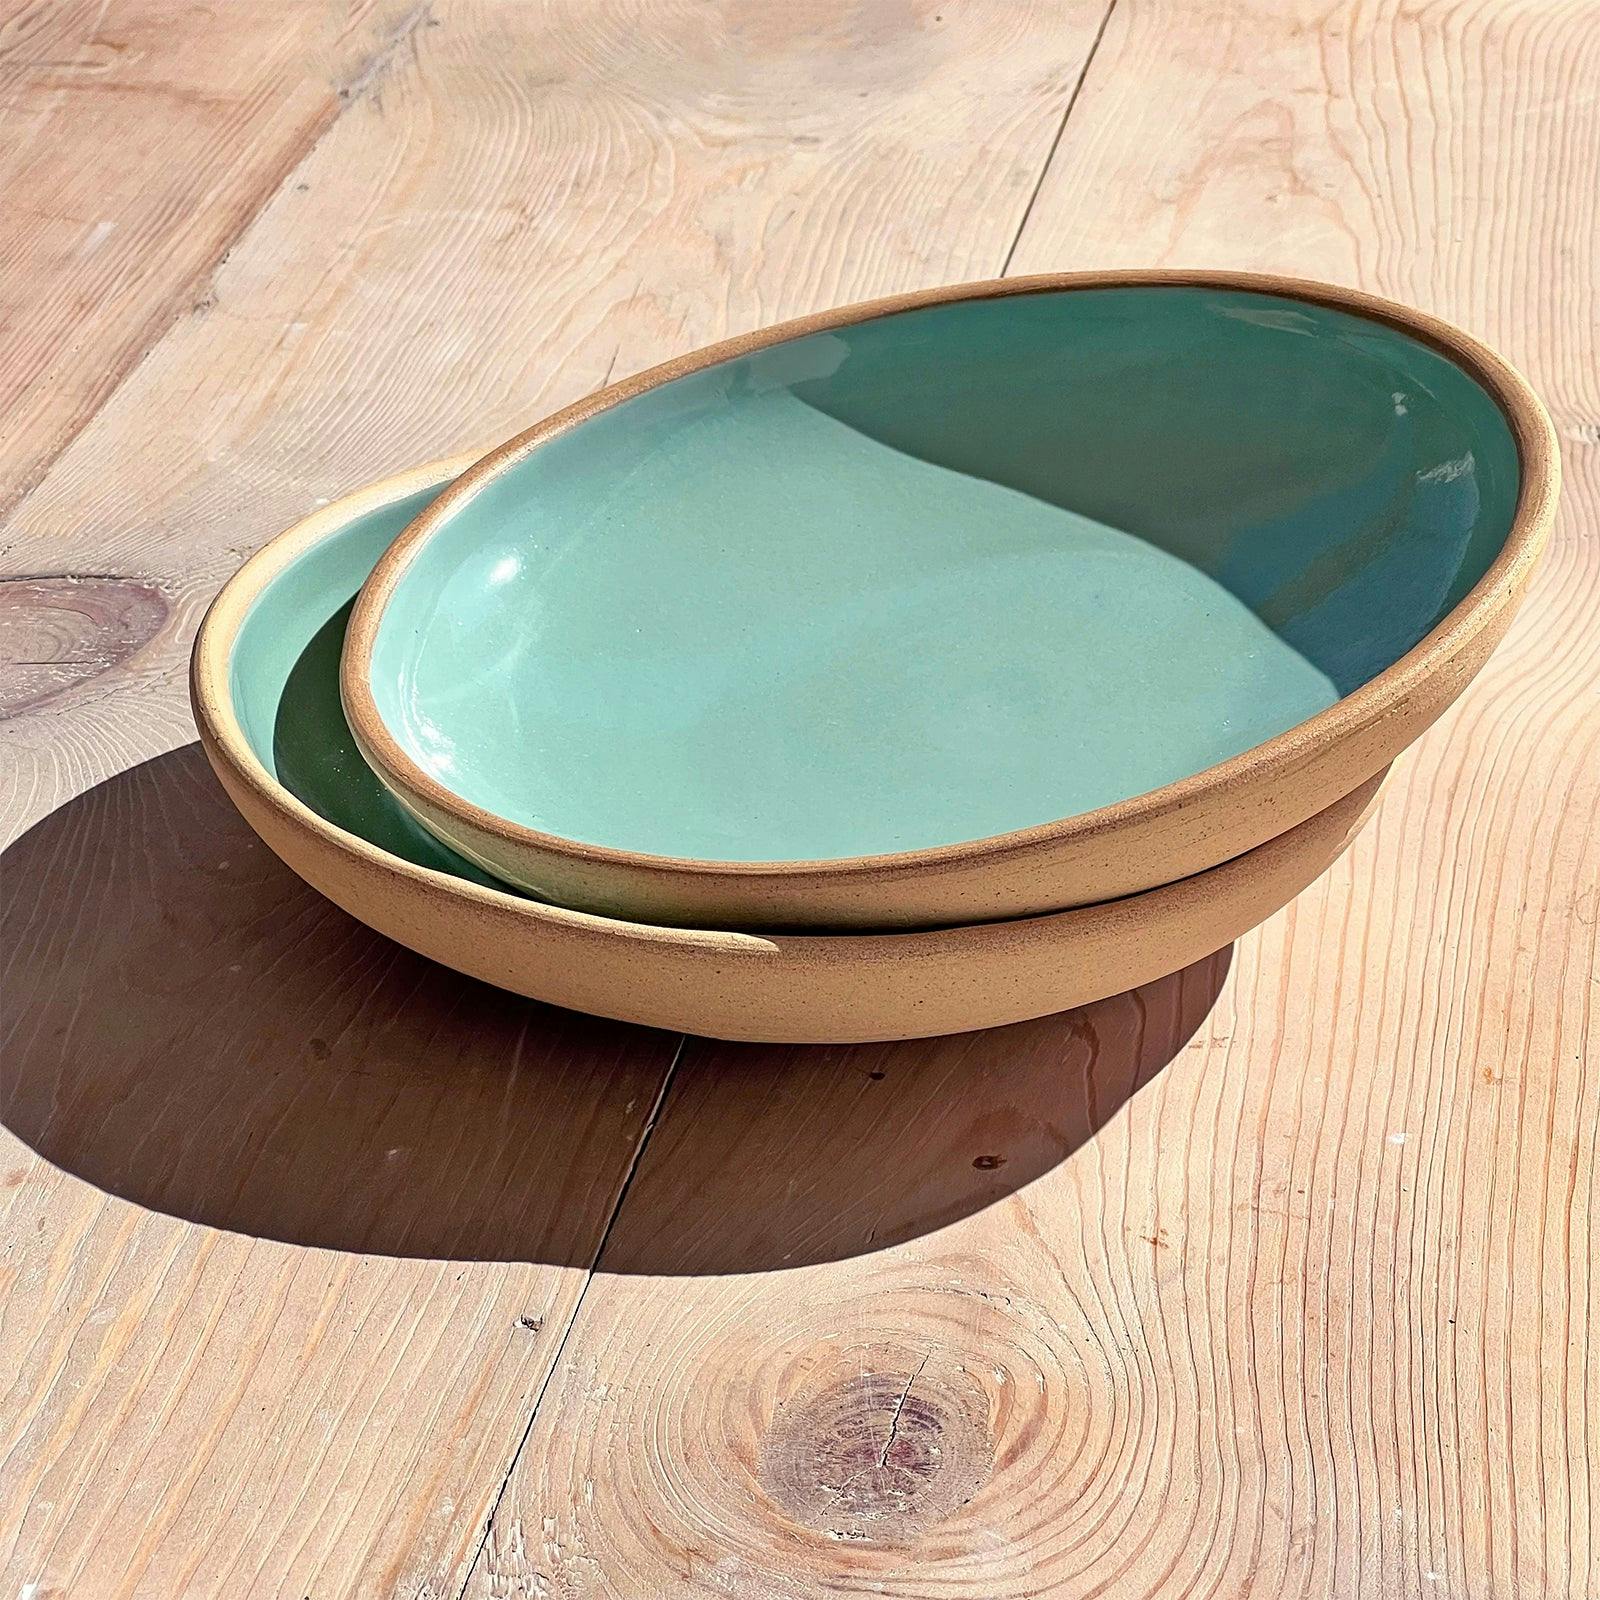 Everyday Bowl in Sea Foam, a product by Midori Collective